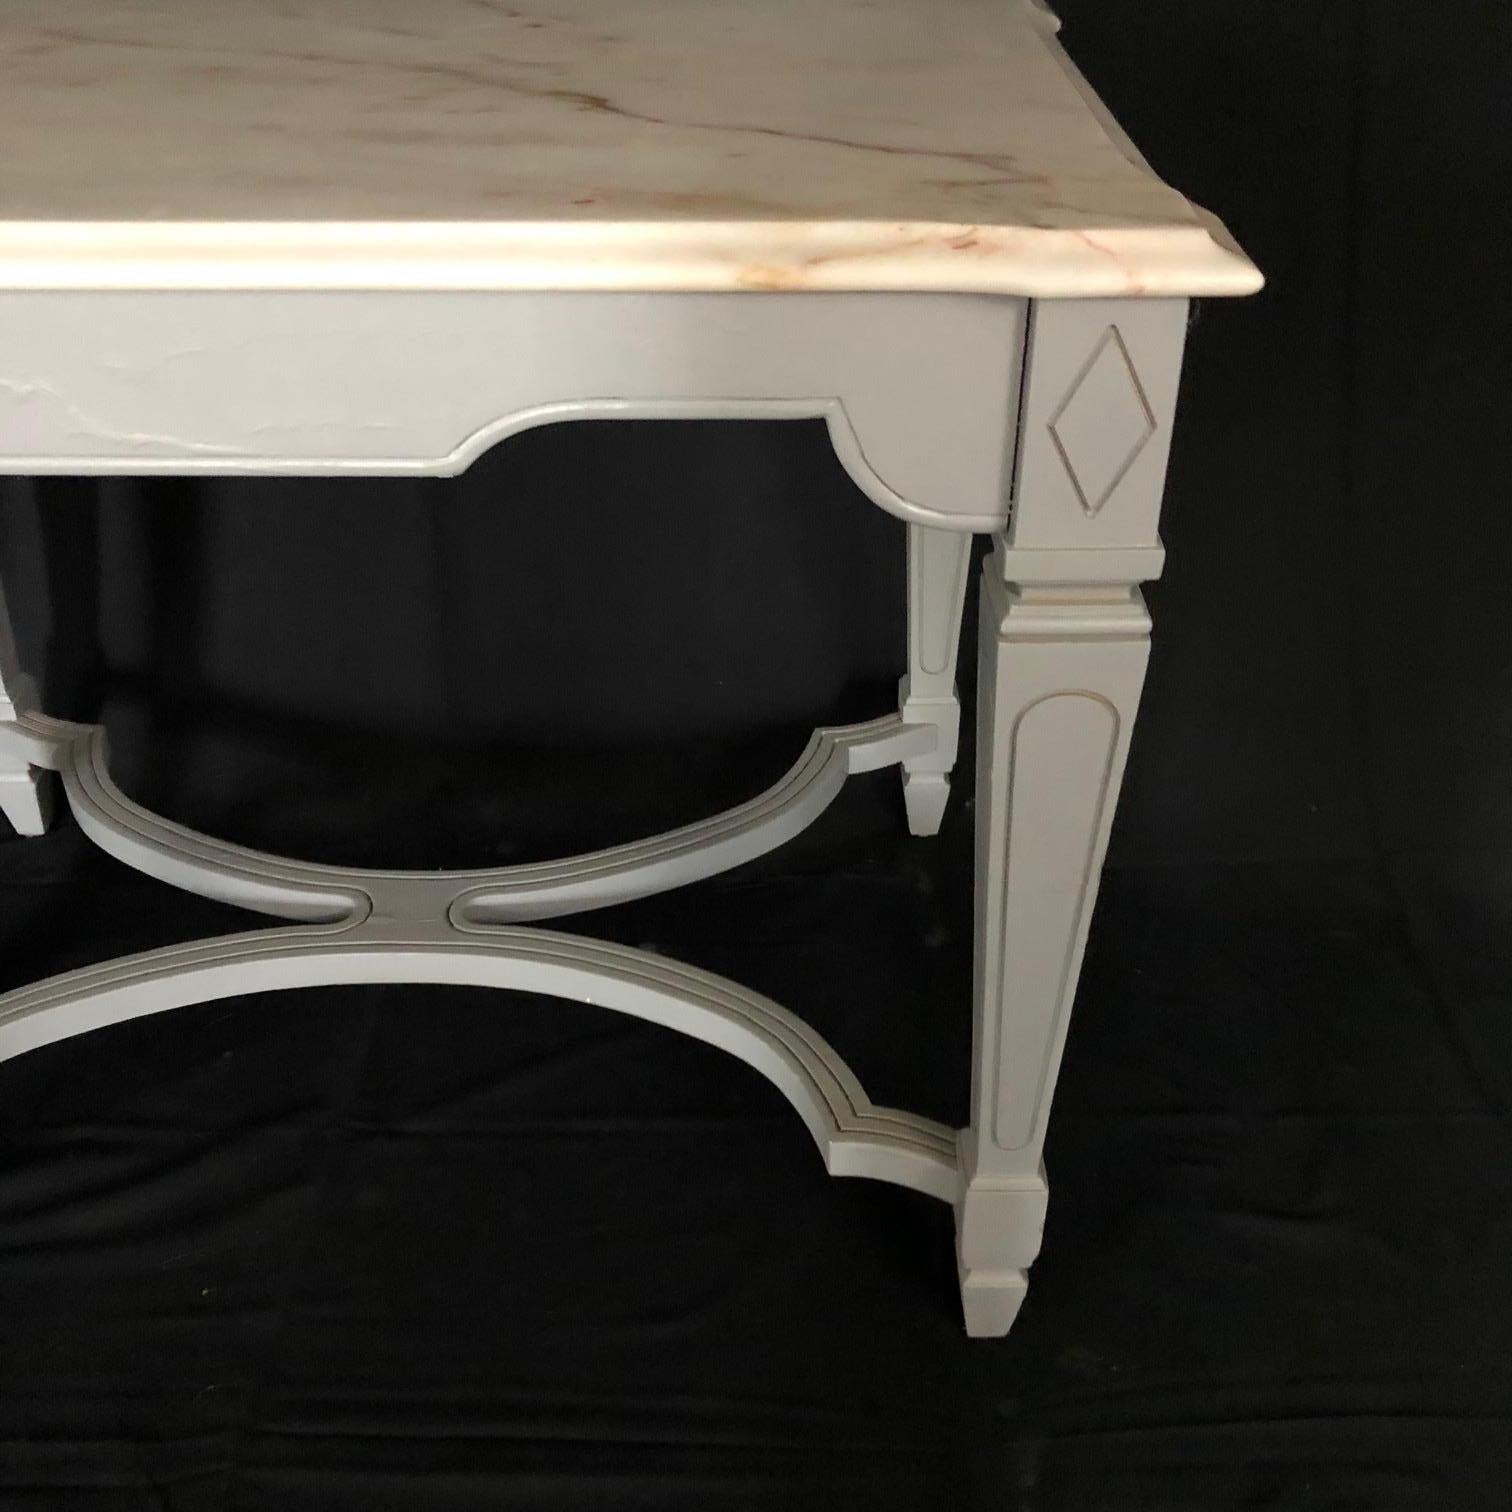 This pair of decorative and versatile side tables, nightstands or bedside tables are handcrafted using a stunning Portuguese Carrera marble. This selective thick marble is in excellent condition and has natural veining in a stunning